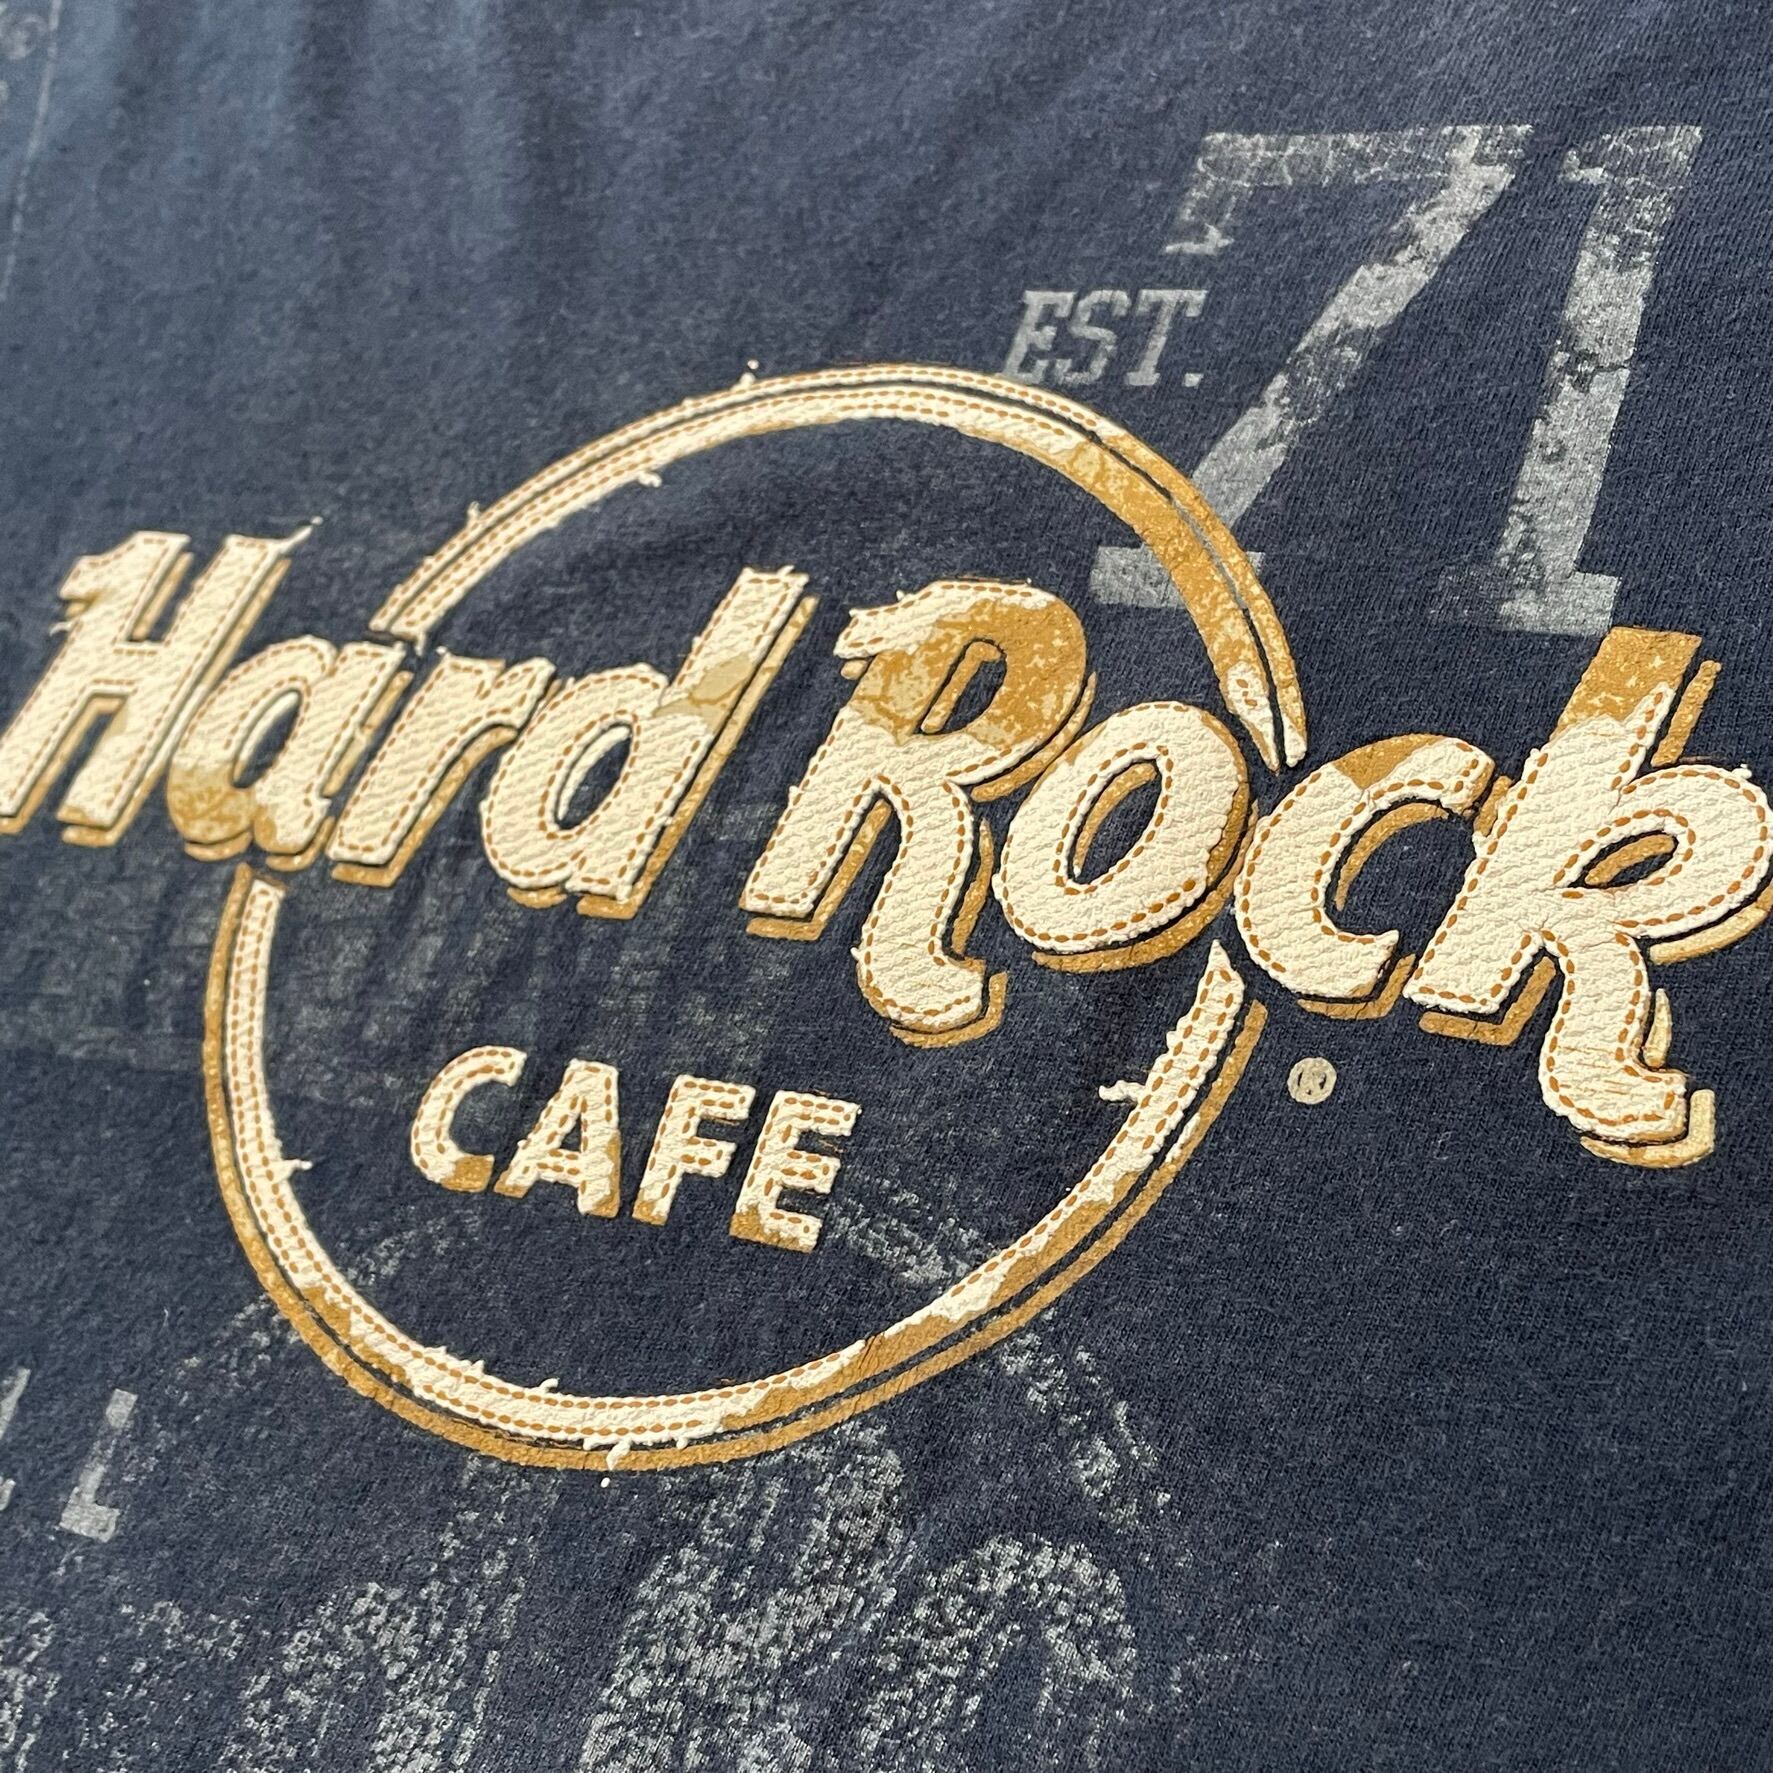 Hard Rock Cafe】ロゴ プリント Tシャツ ハードロックカフェ ギター M ...